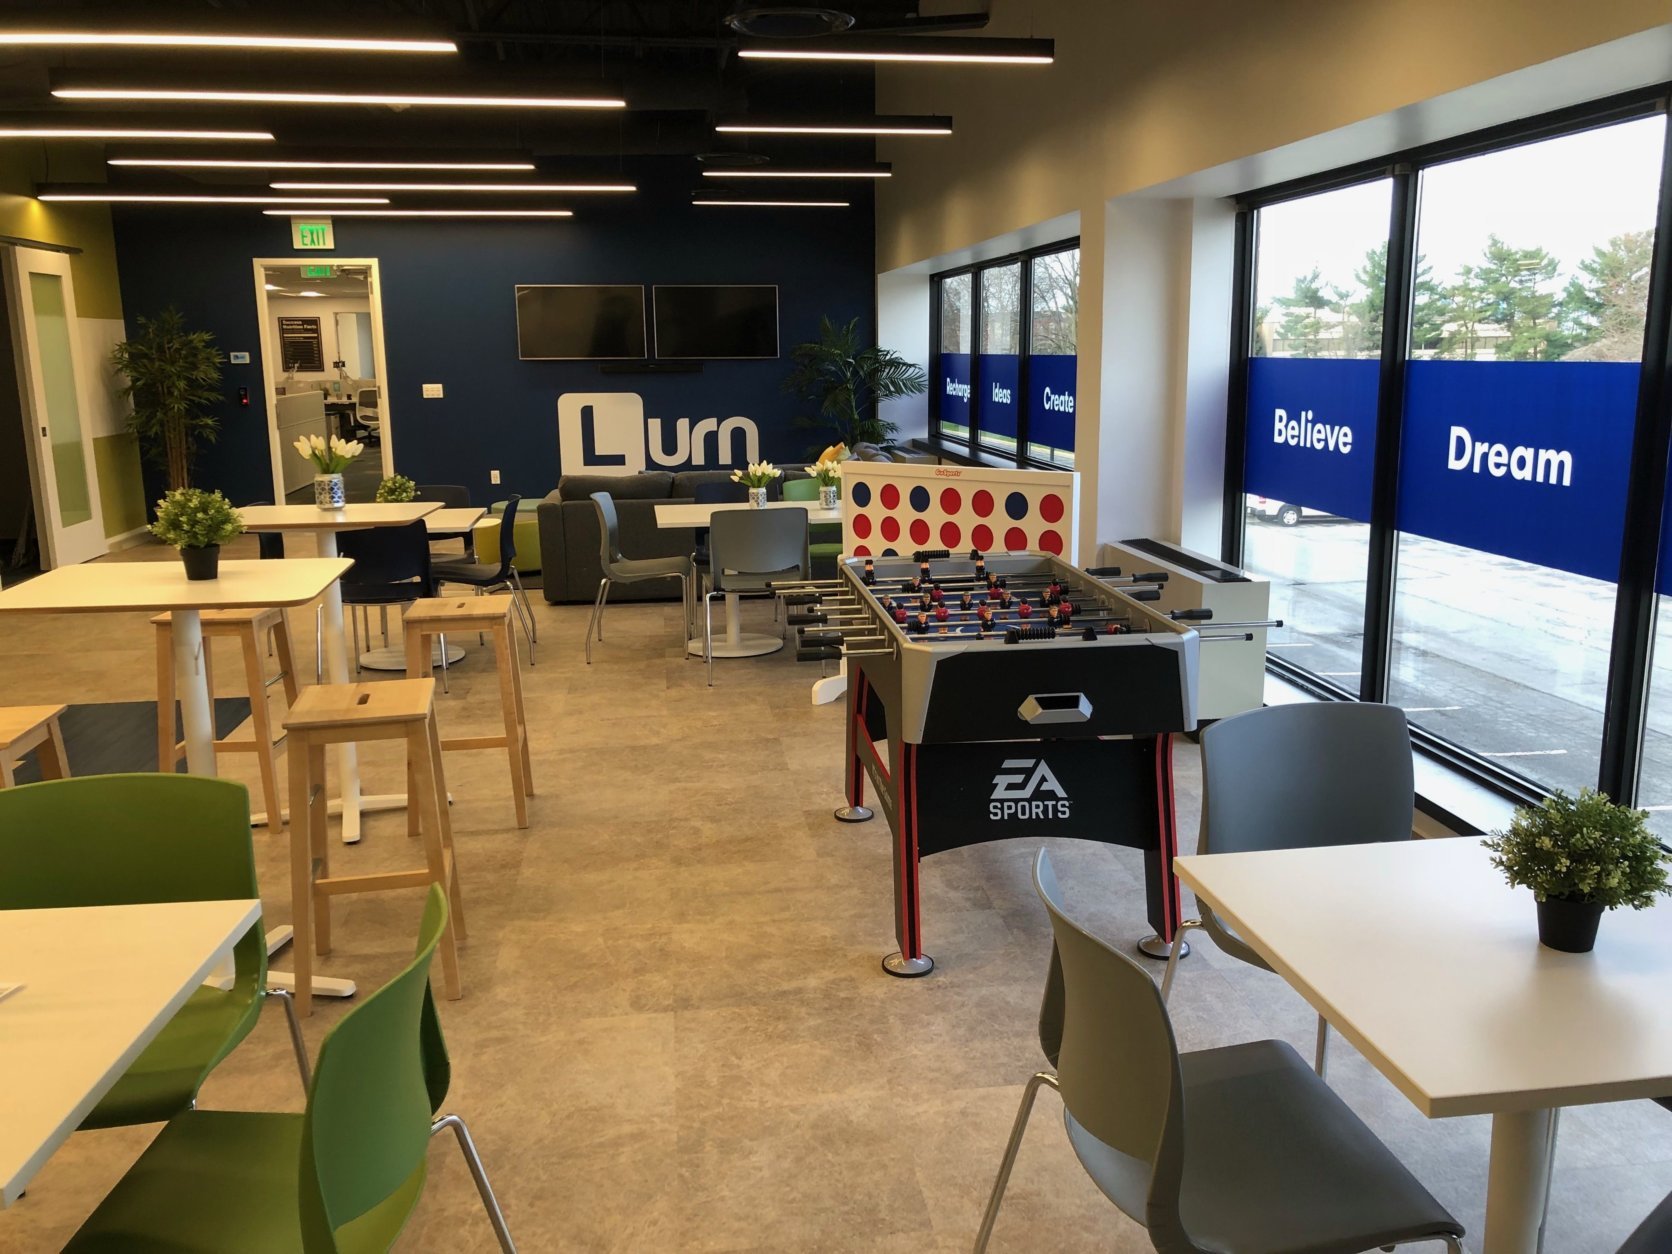 With everything from lecture rooms, studios, nap rooms, and Foozball, Lurn, Inc. offers entrepreneurs a community to develop startup businesses. (Courtesy On the Marc Media)